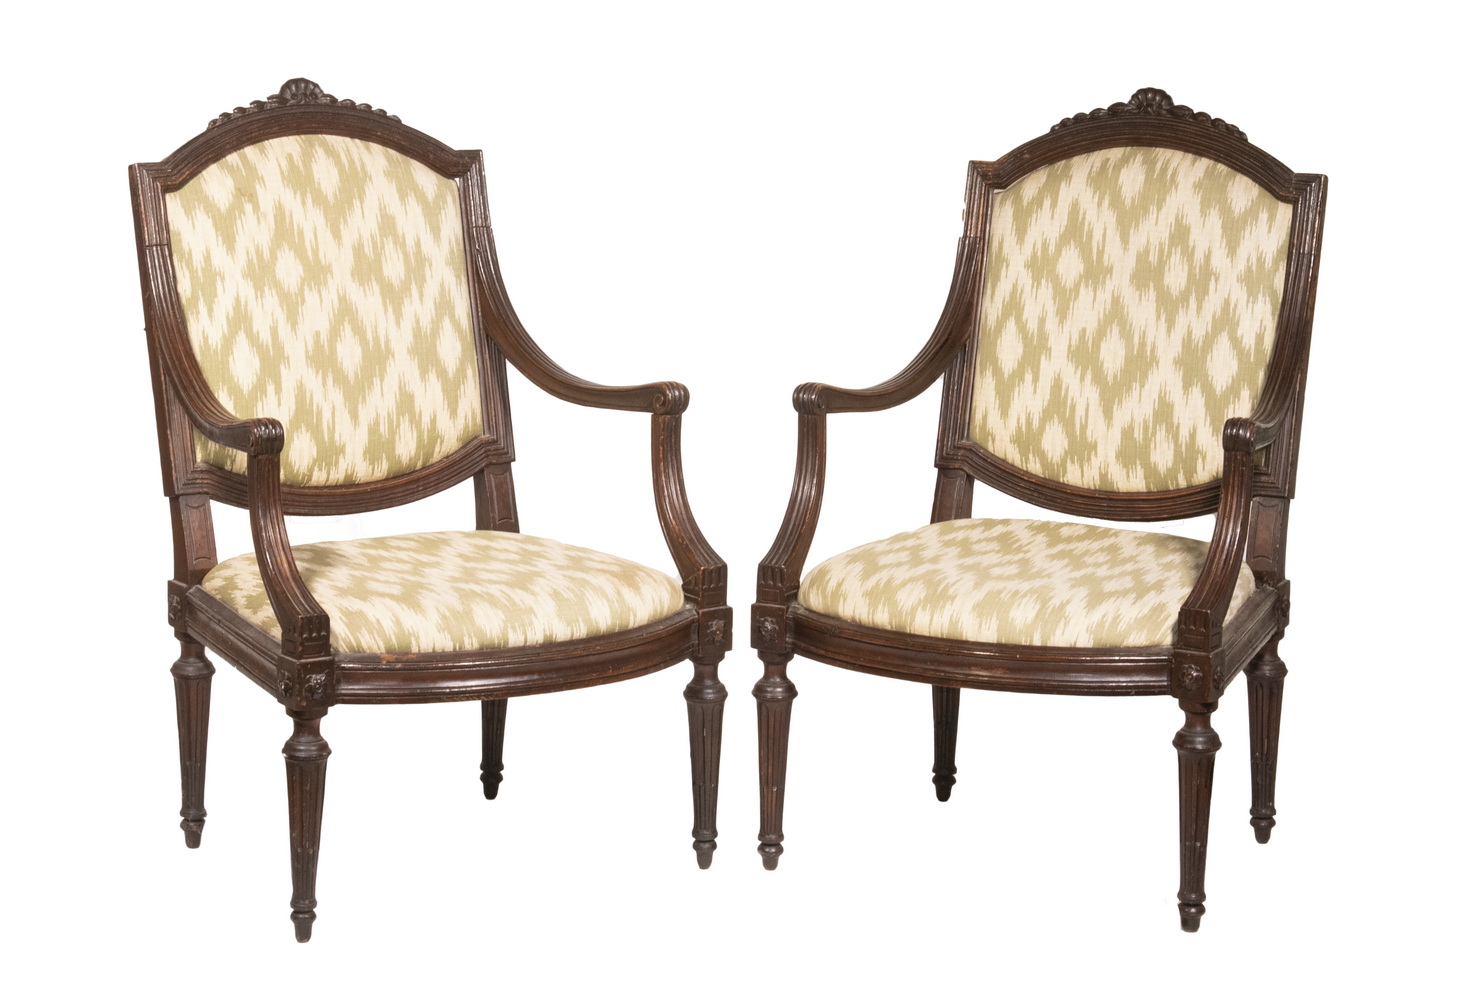 PAIR OF FRENCH NAPOLEON III ARMCHAIRS 2b2d32